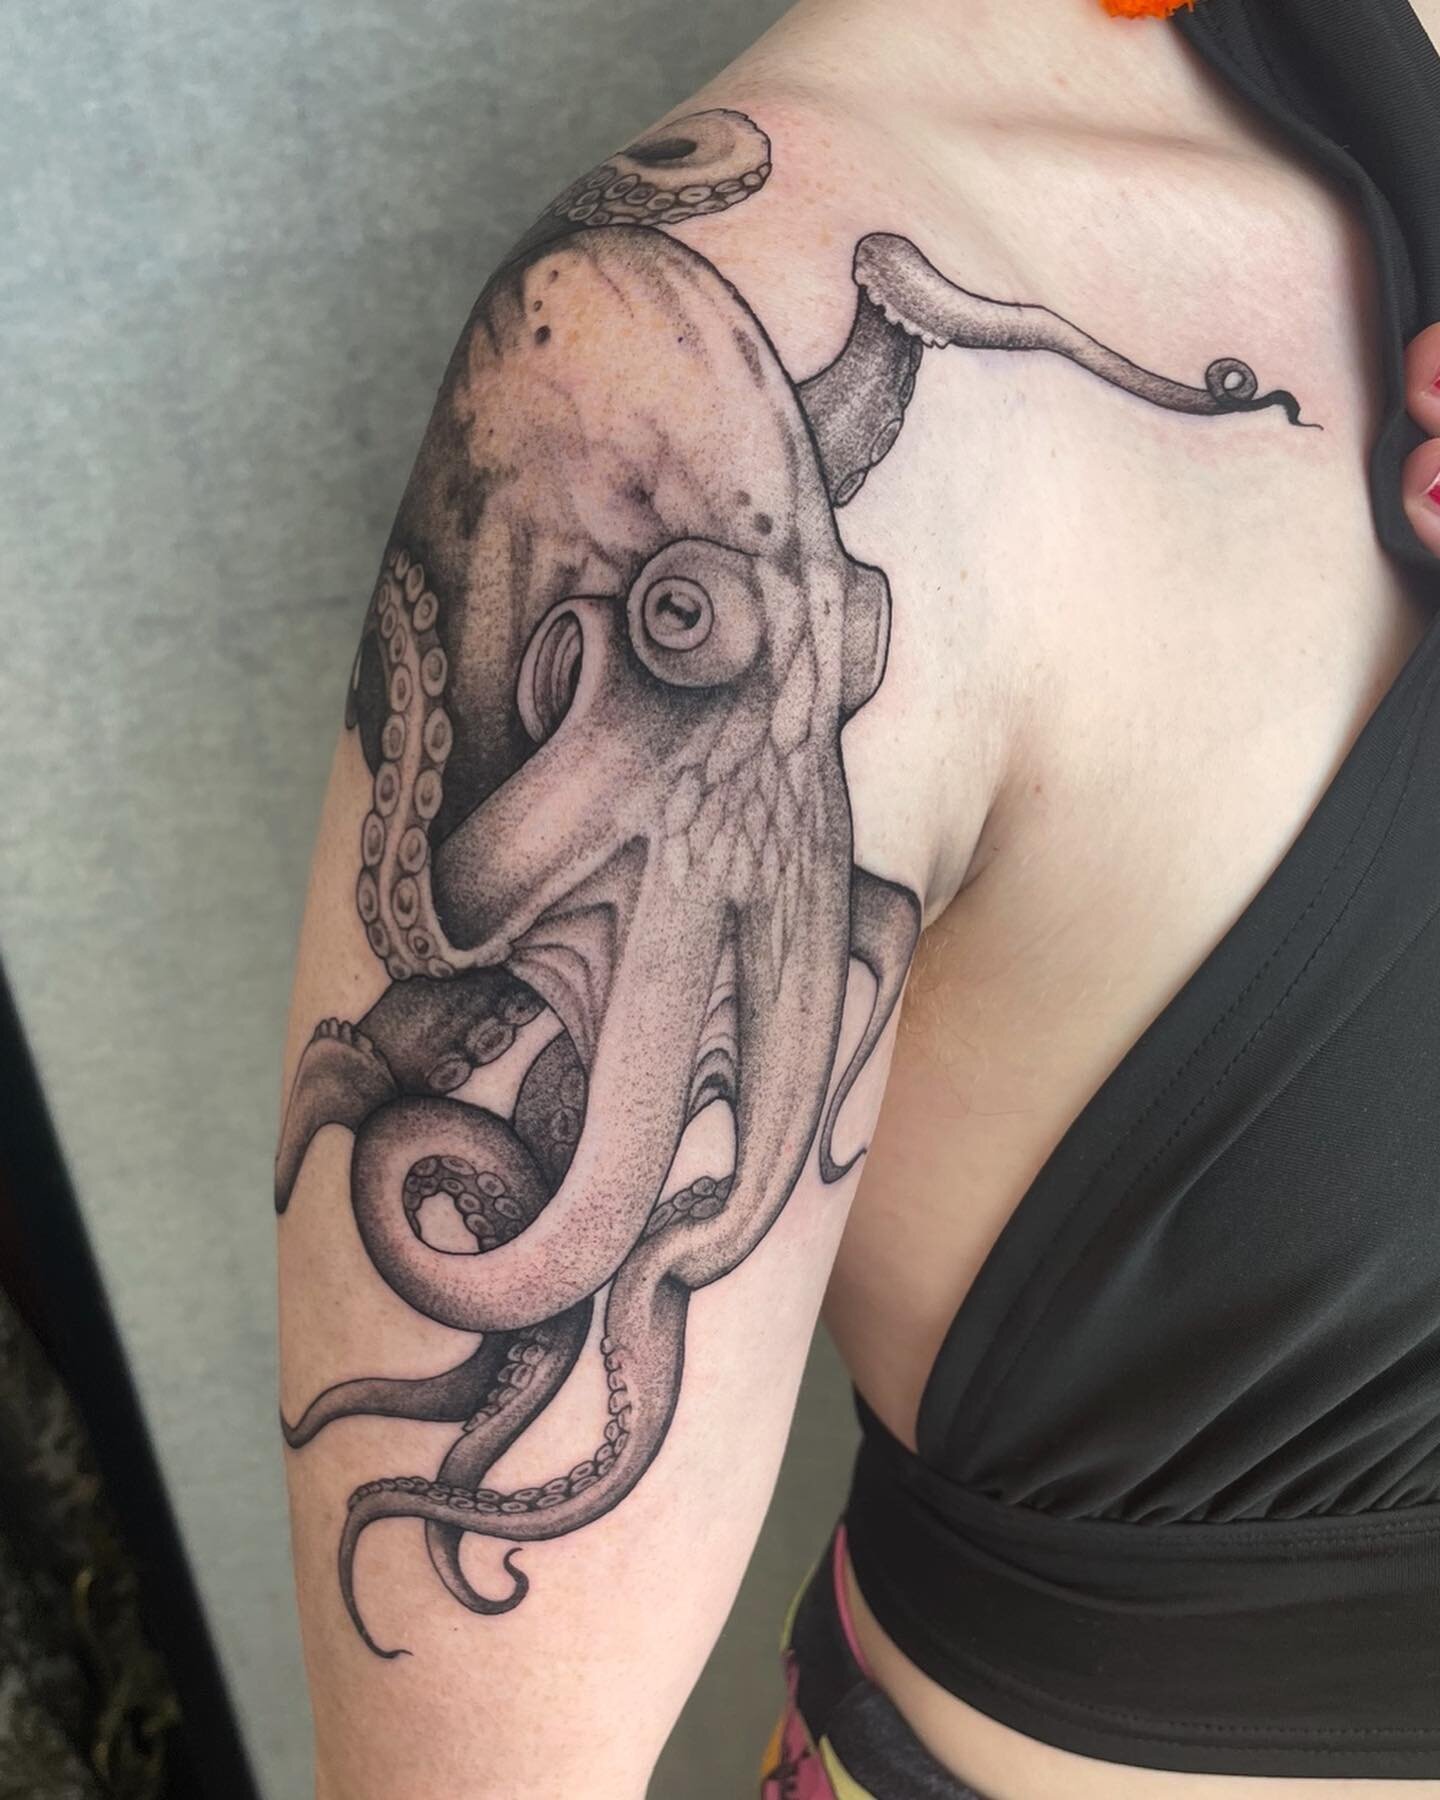 Octopusyy for one beautiful person, Thank you so much pal!!